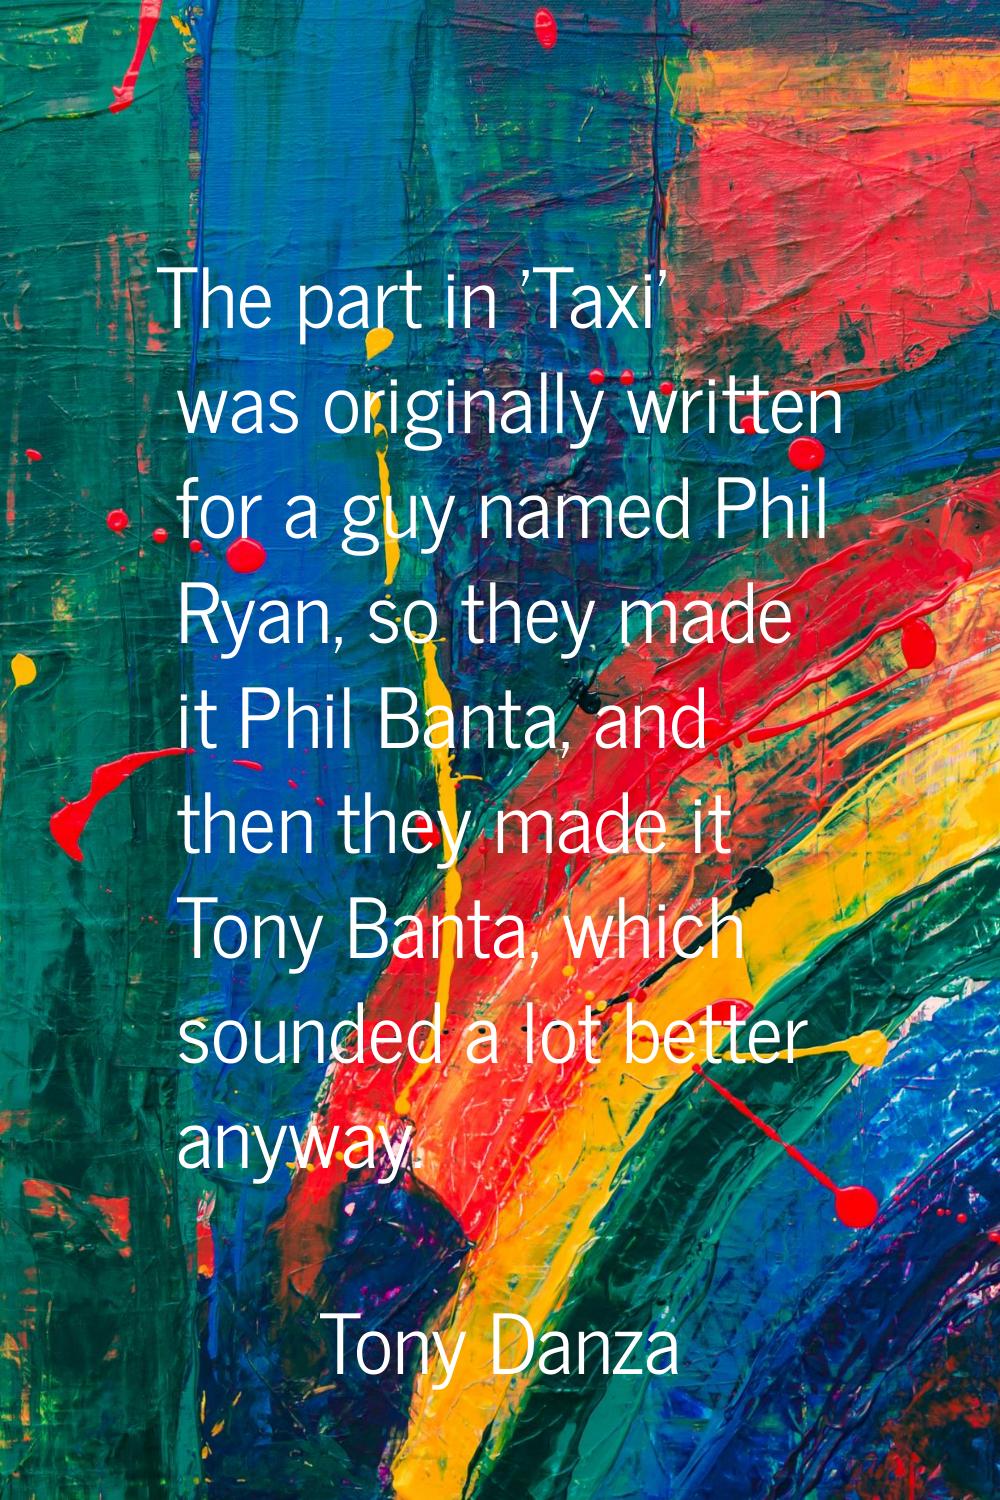 The part in 'Taxi' was originally written for a guy named Phil Ryan, so they made it Phil Banta, an